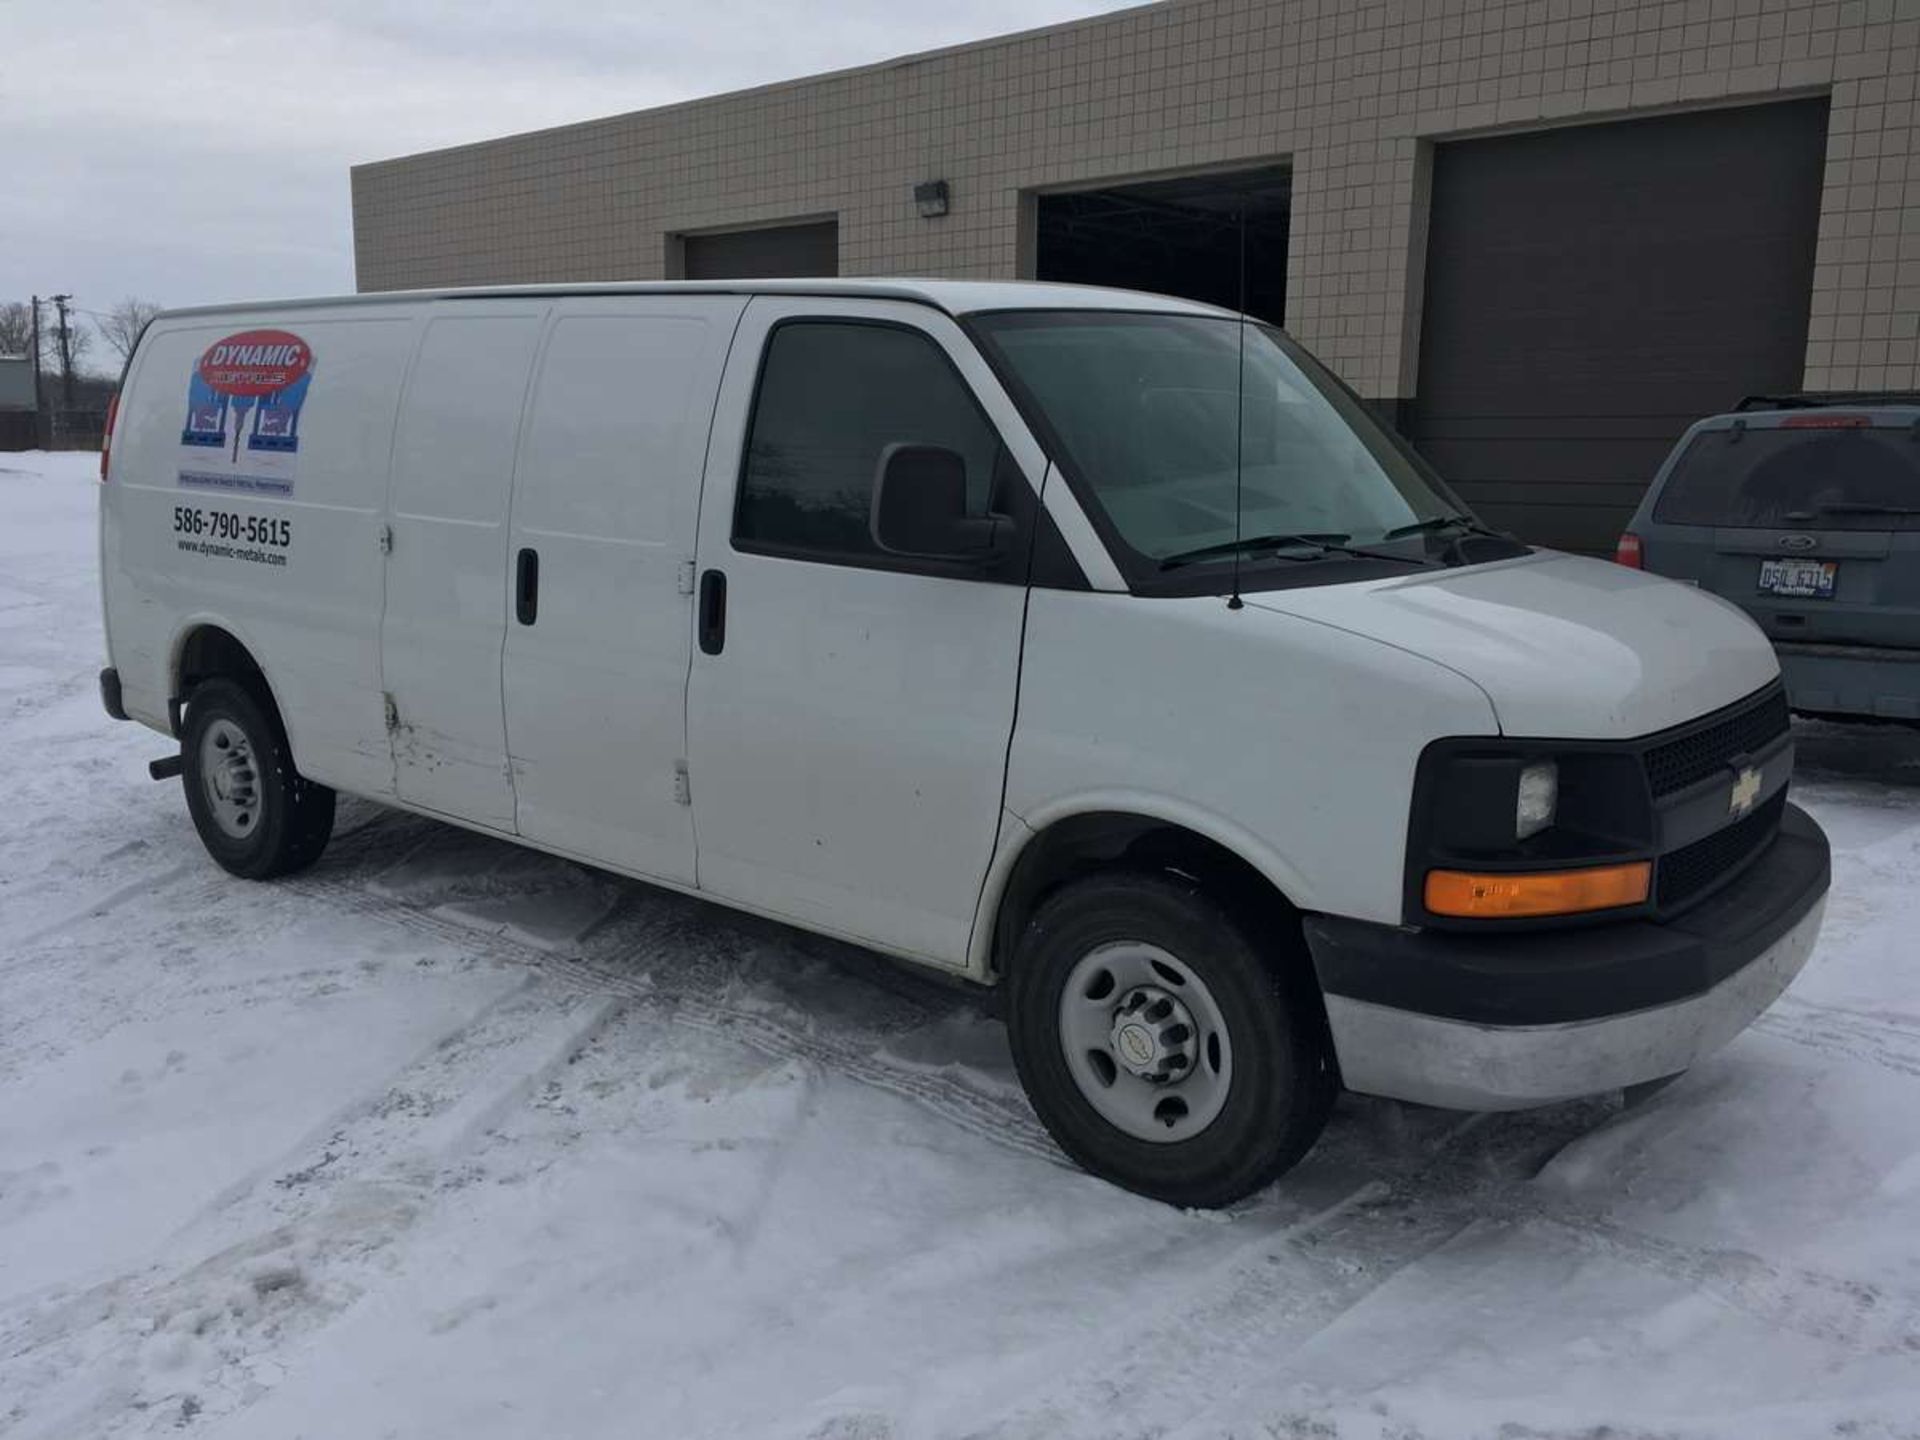 2013 Chevrolet Express 3500 EXT 1 Ton Capacity Extended Cargo Van - Image 4 of 14